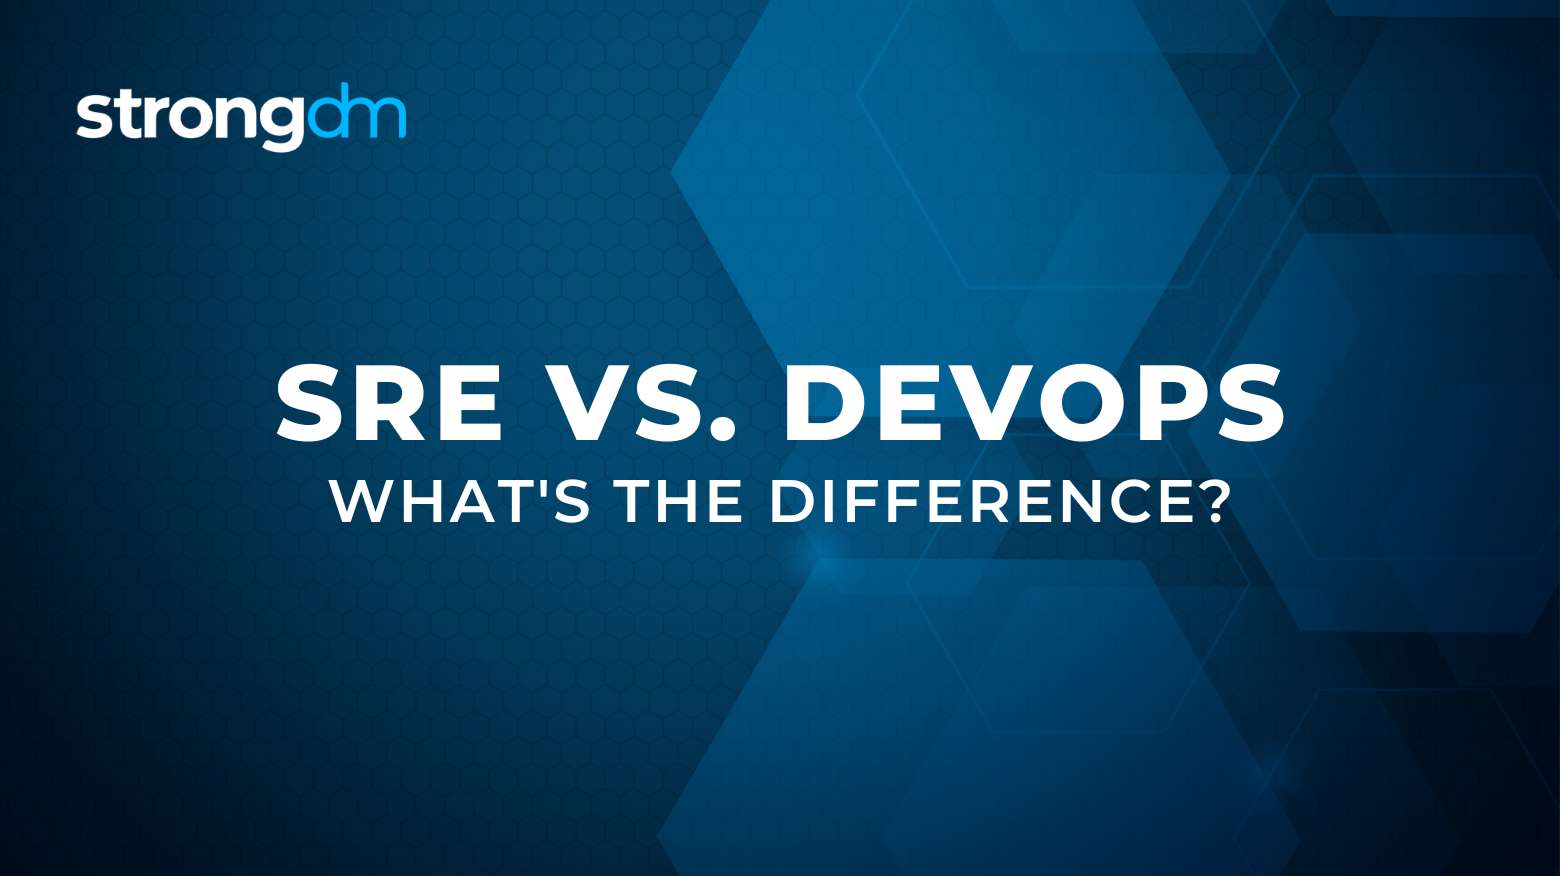 Comparing SRE and DevOps: What Are the Differences?